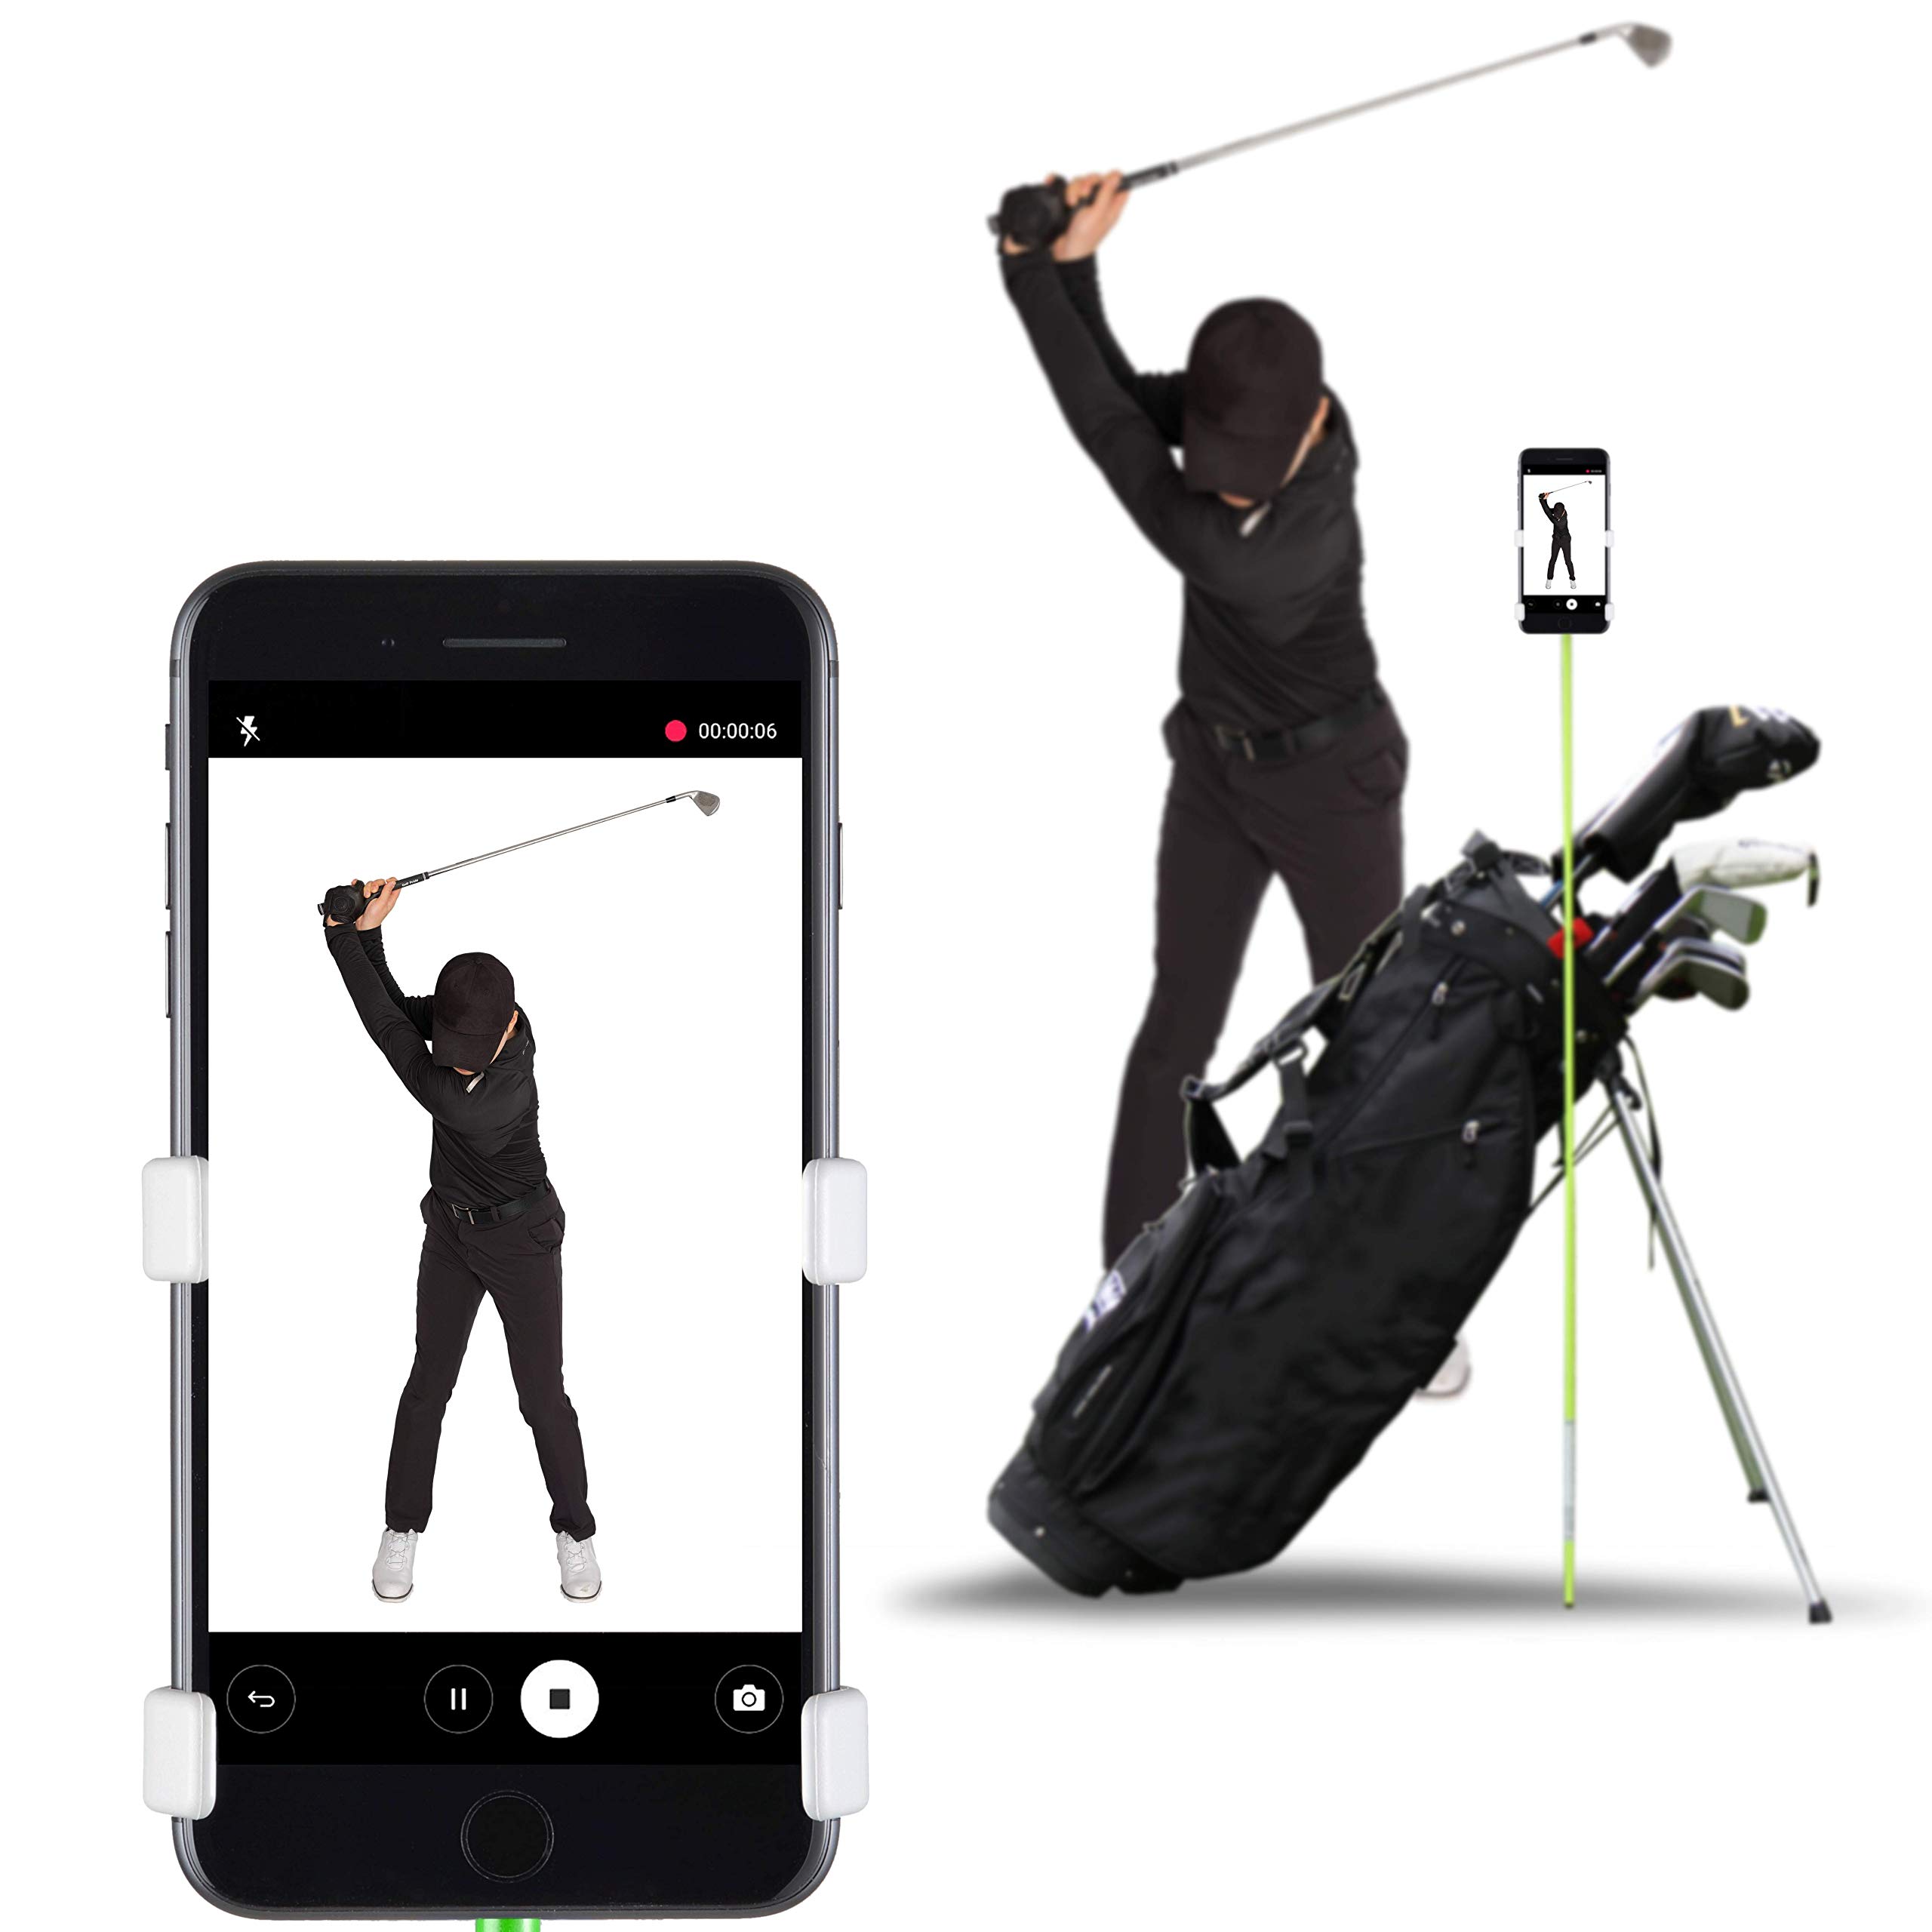 SelfieGOLF Record Golf Swing - Cell Phone Holder Golf Analyzer Accessories | Winner of The PGA Best Product | Selfie Putting Training Aids Works with Any Golf Bag and Alignment Stick